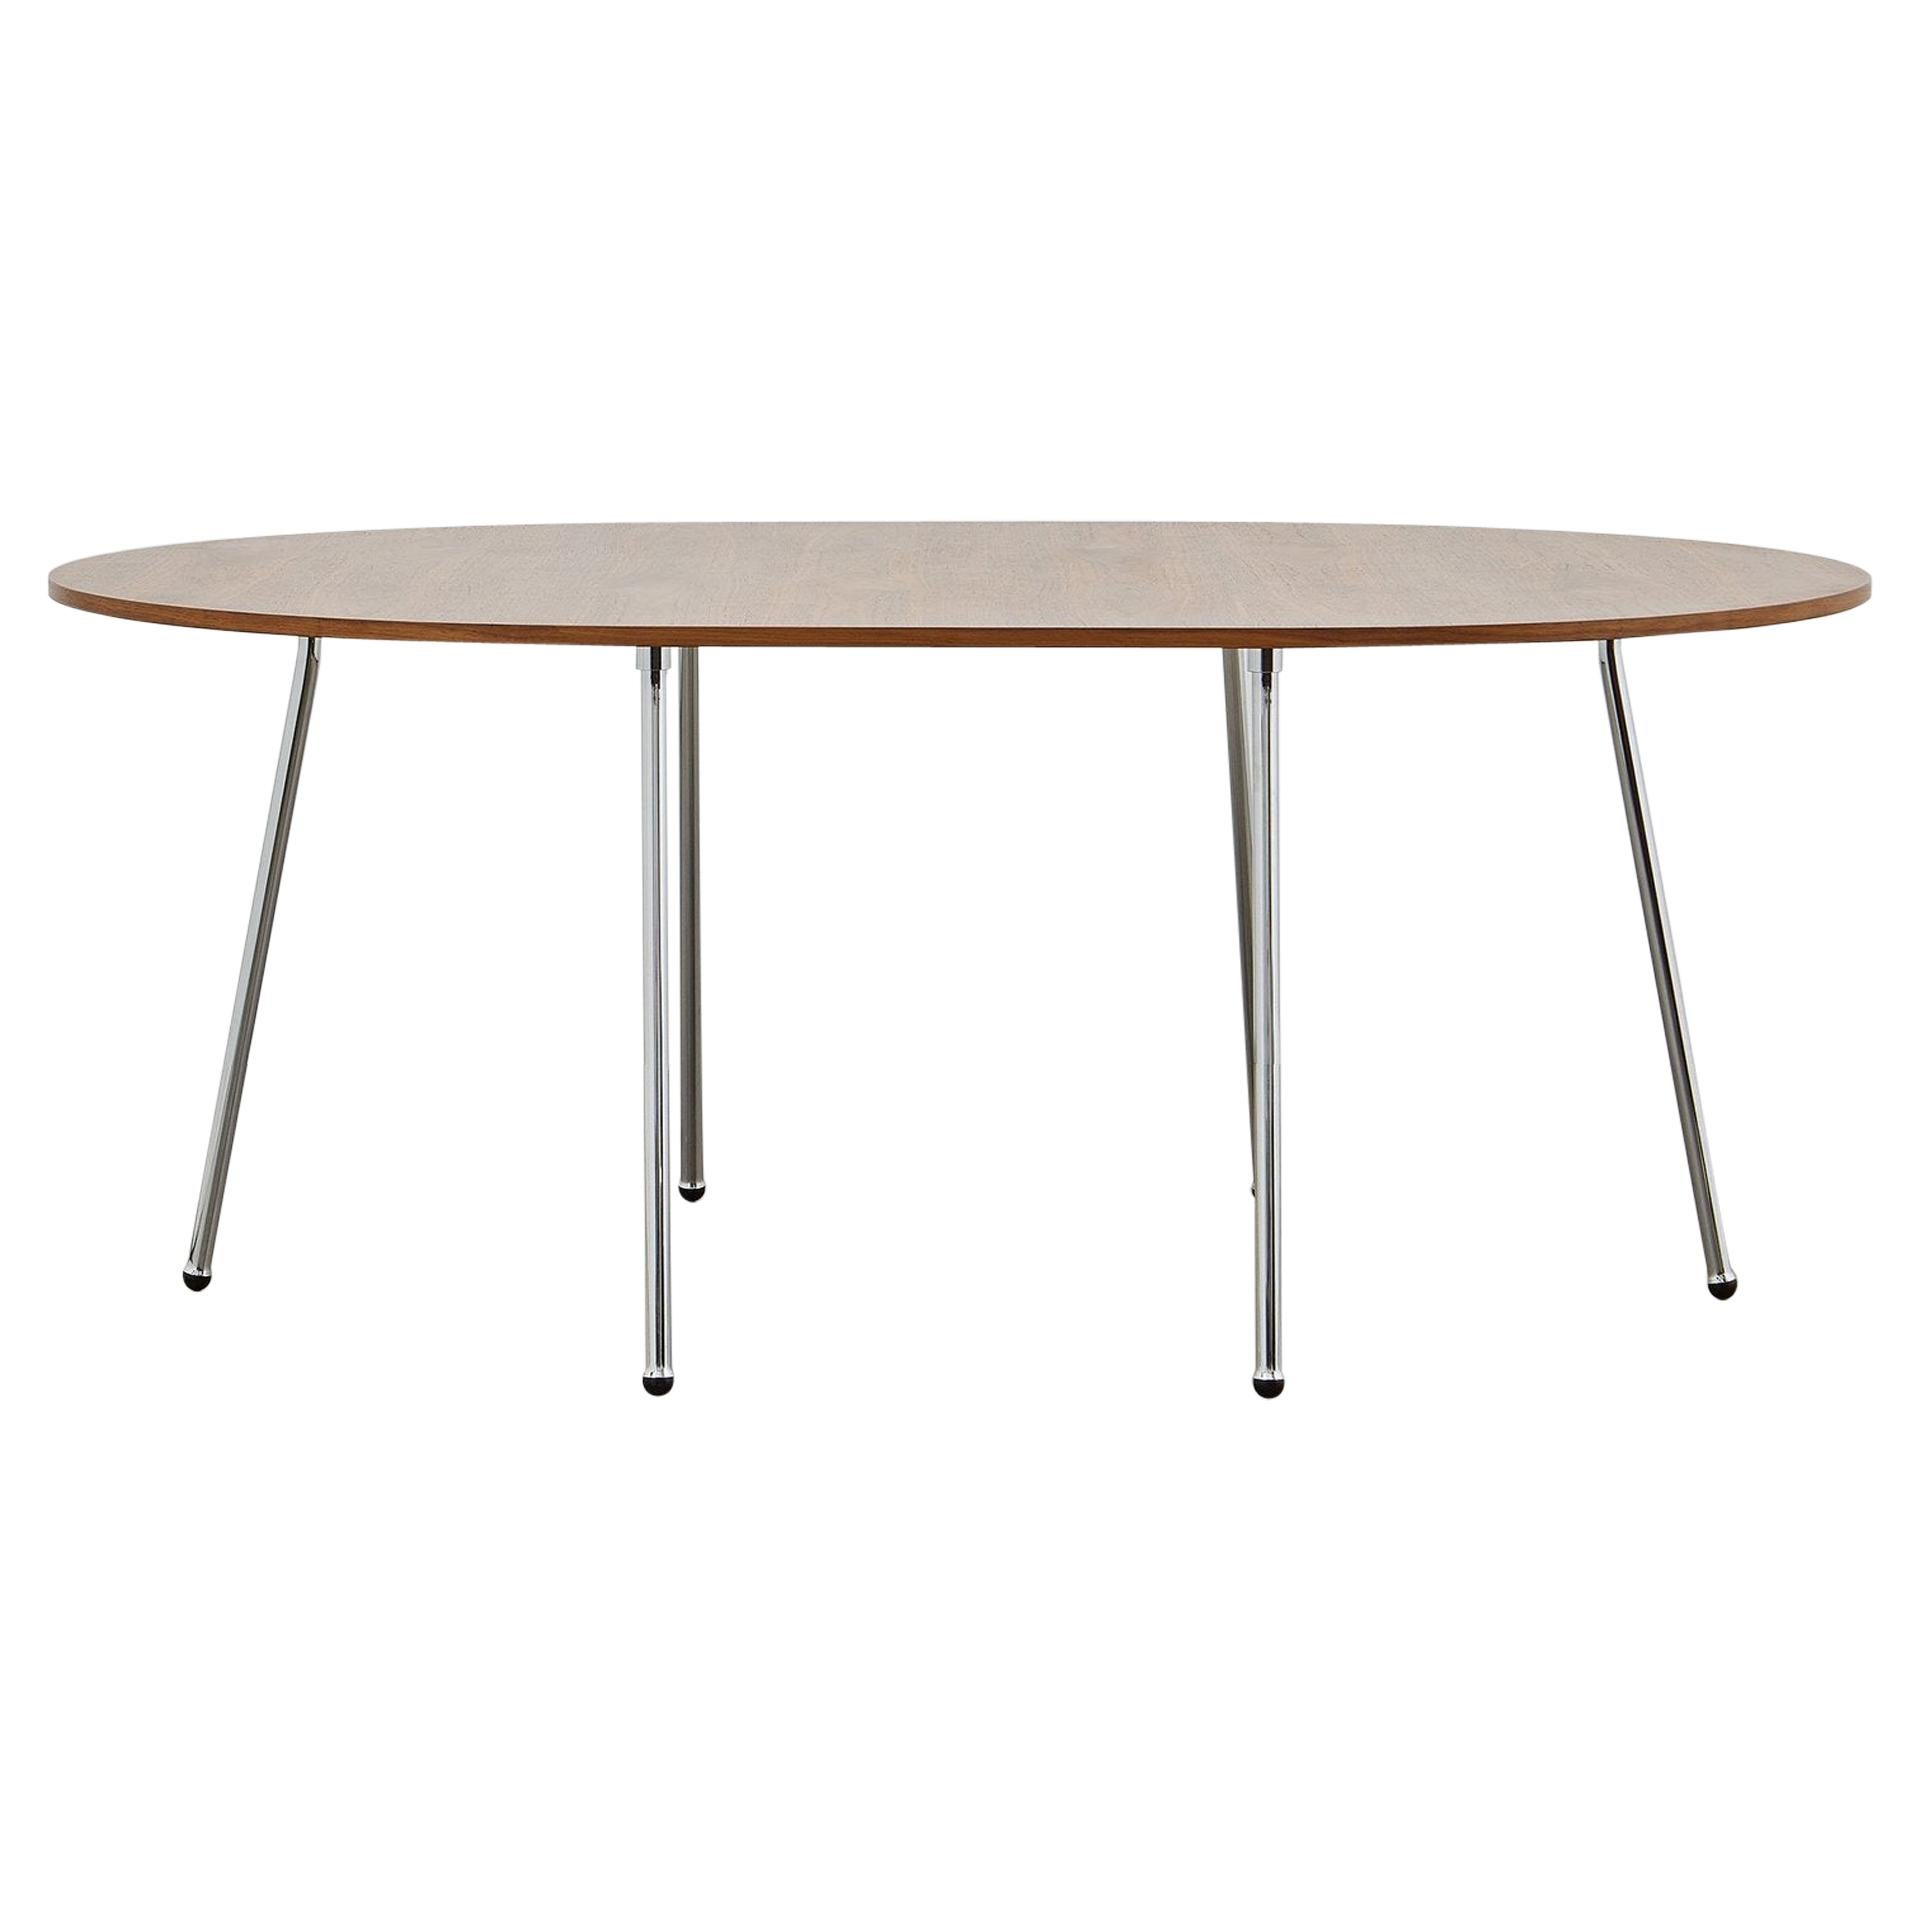 PH Dining Table, Chrome, Natural Oak Veneer Table Plate and Edge For Sale